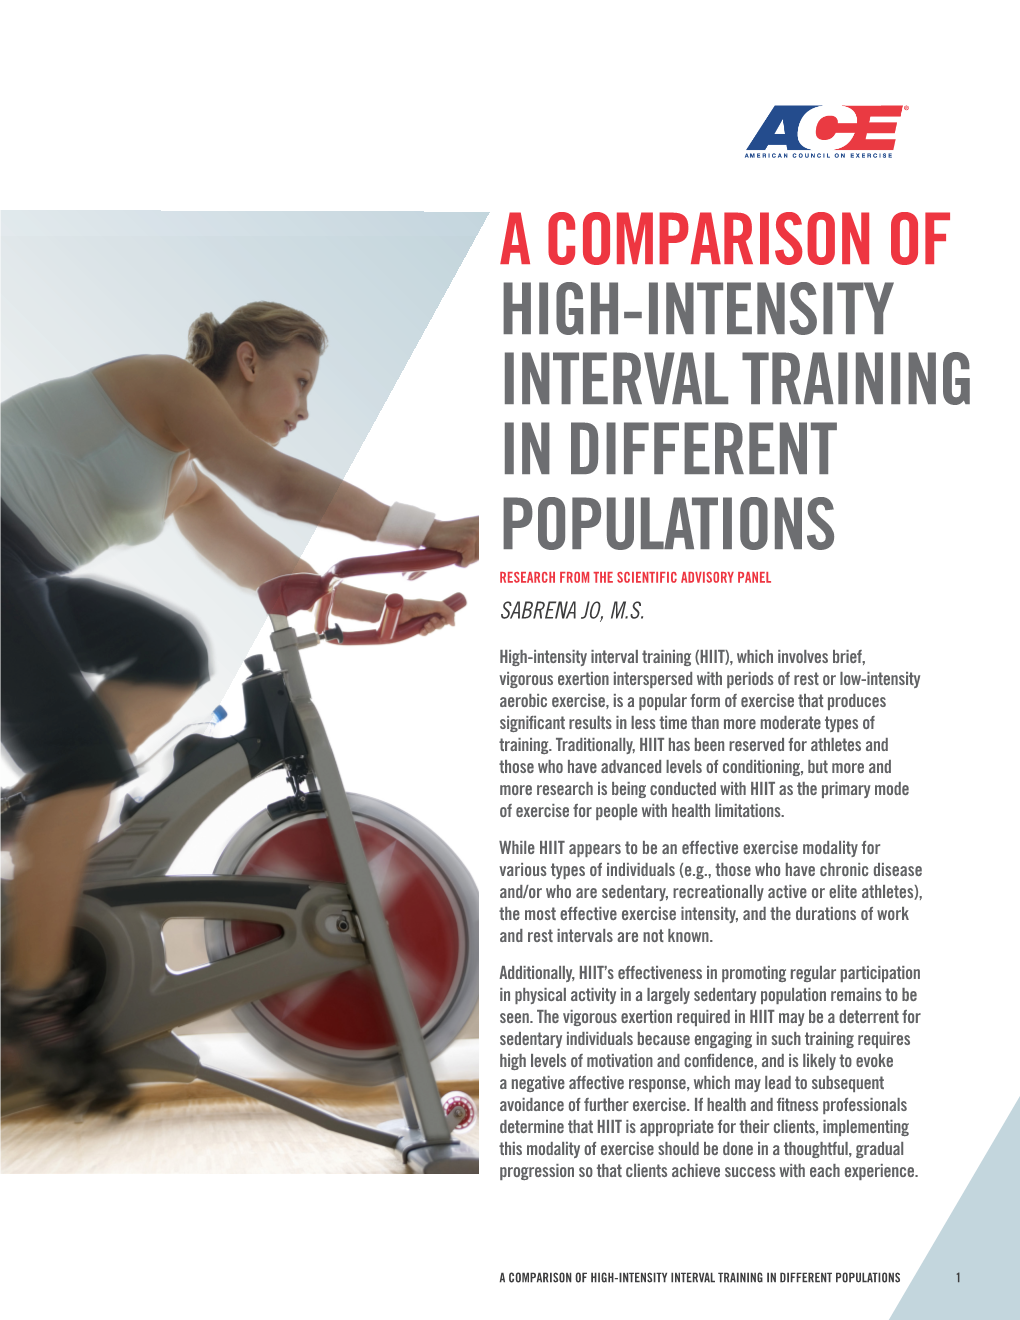 A Comparison of High-Intensity Interval Training in Different Populations Research from the Scientific Advisory Panel Sabrena Jo, M.S